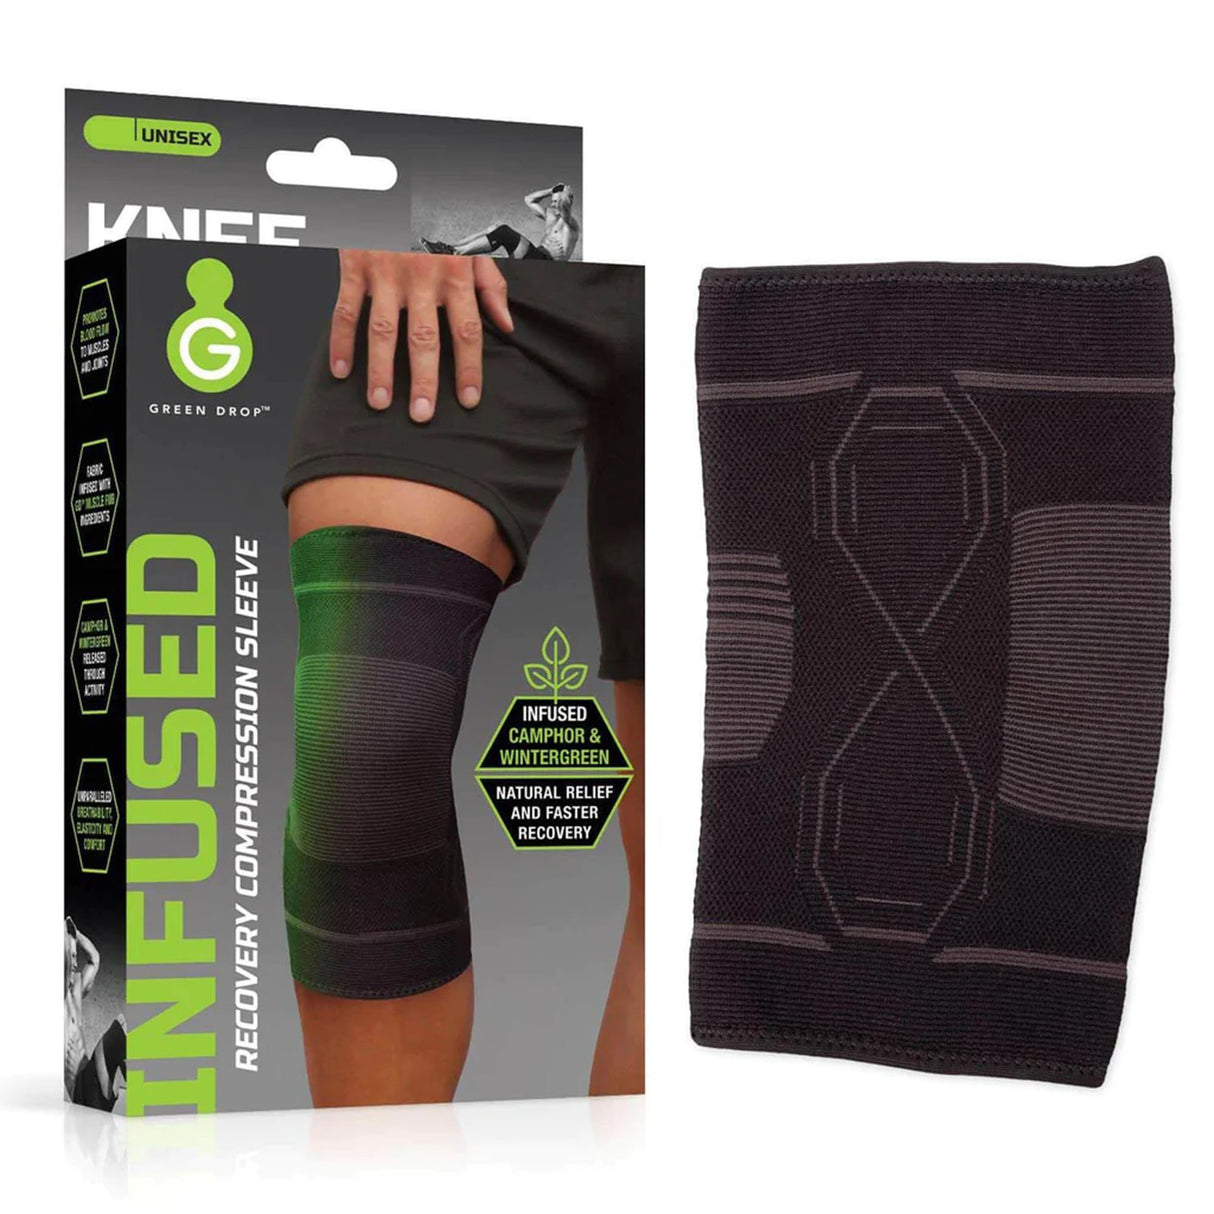 Green Drop Knee Compression Sleeve - Infused Injury Support, L/XL